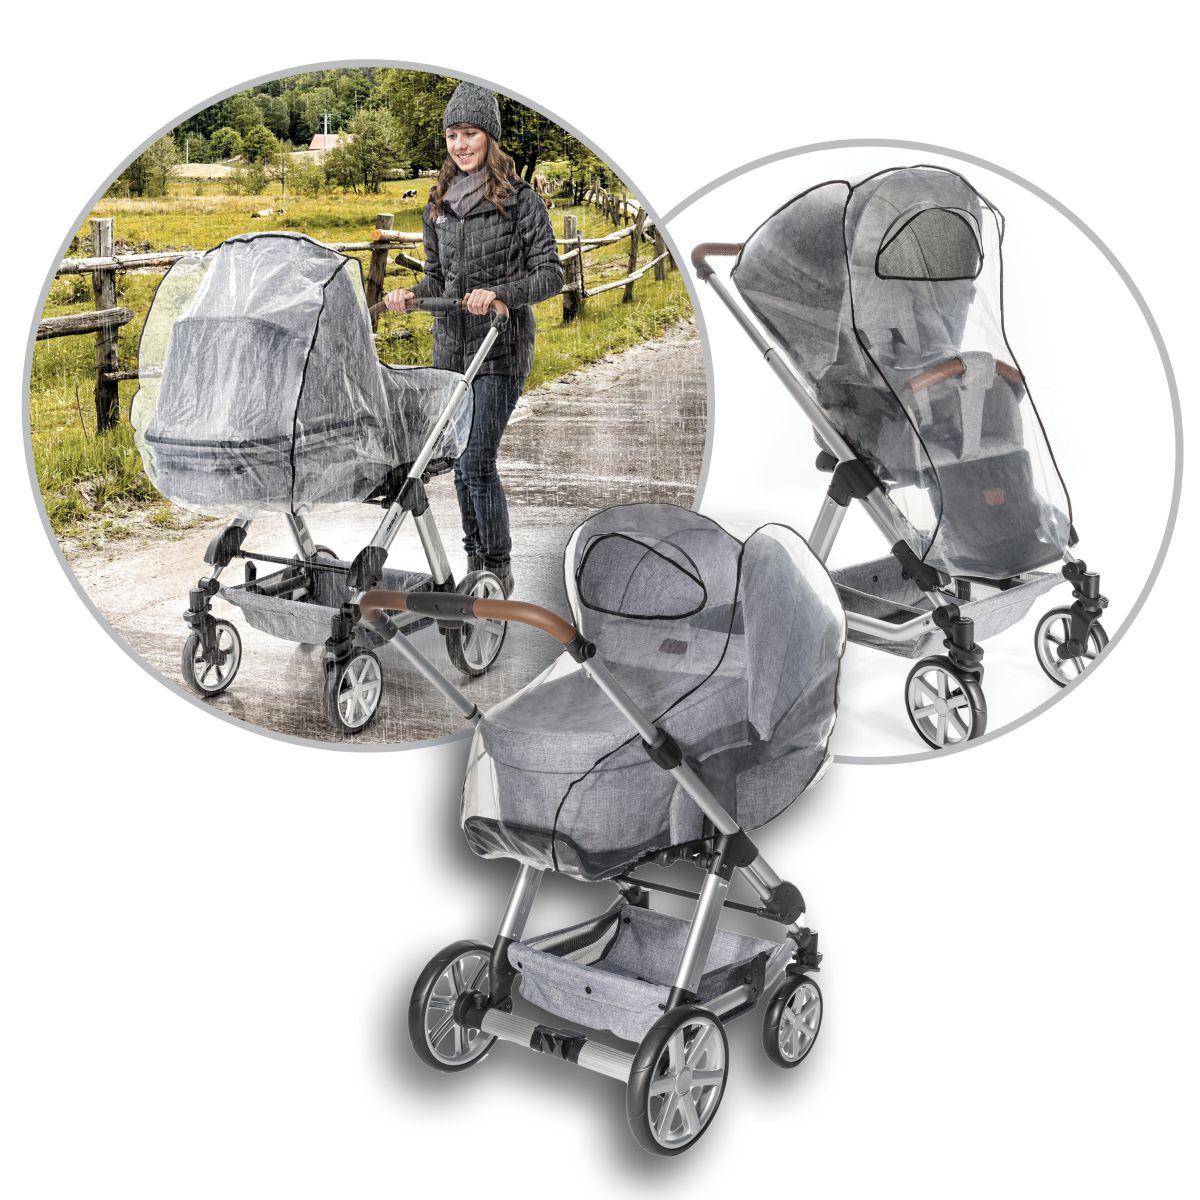 RainCover Classic Rain cover for combi-pushchairs